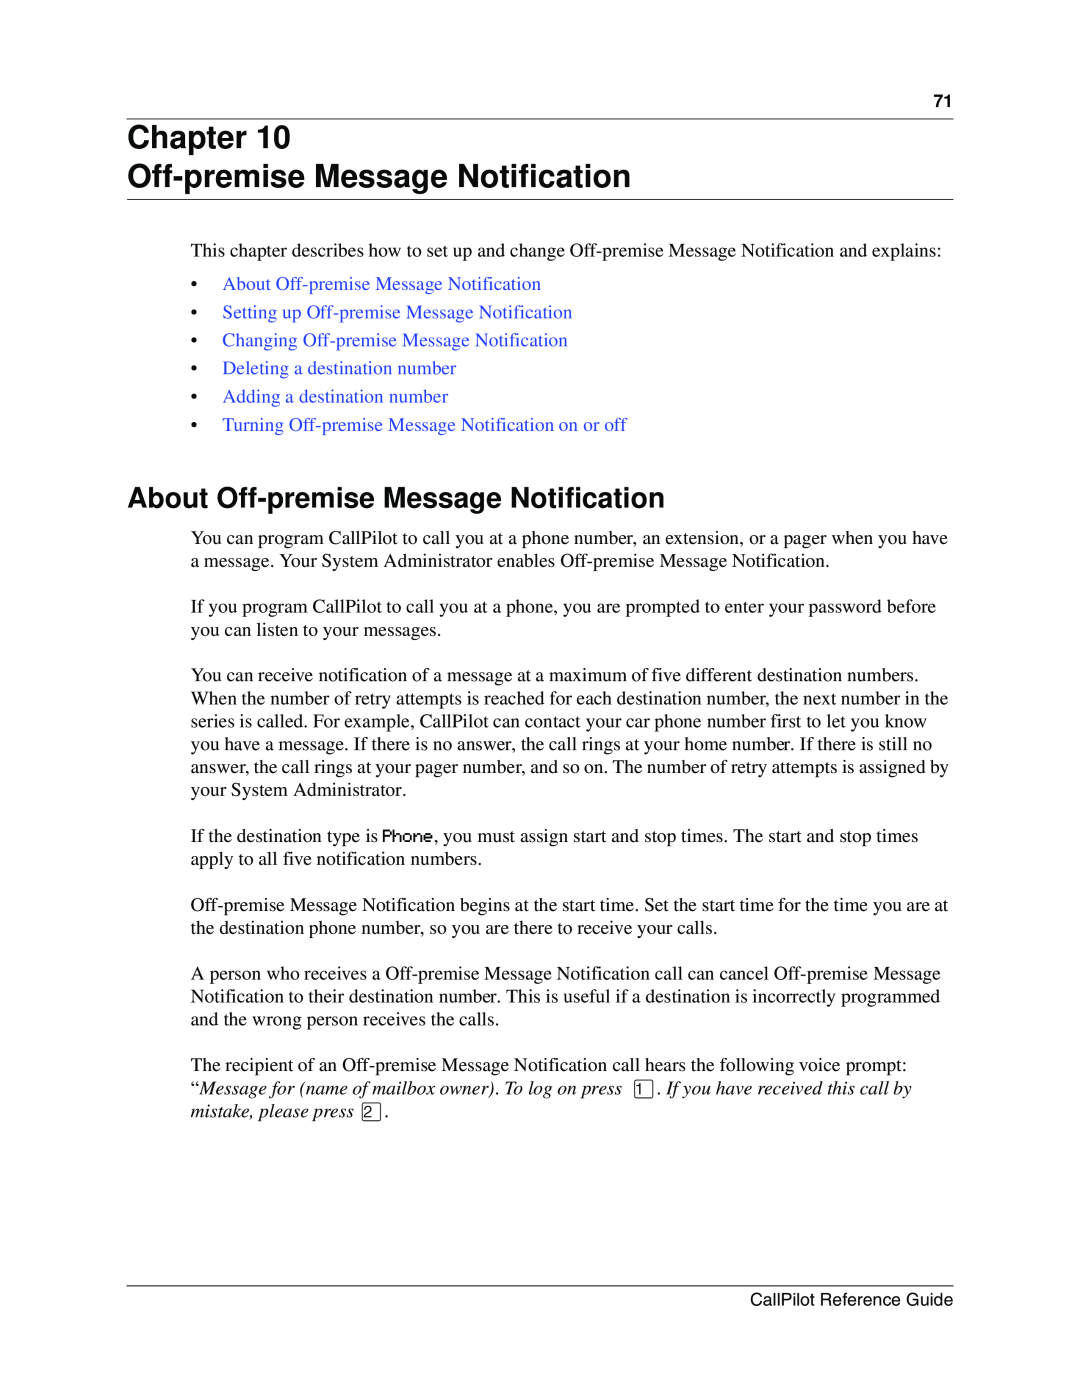 Nortel Networks CallPilot manual Chapter Off-premise Message Notification, About Off-premise Message Notification 